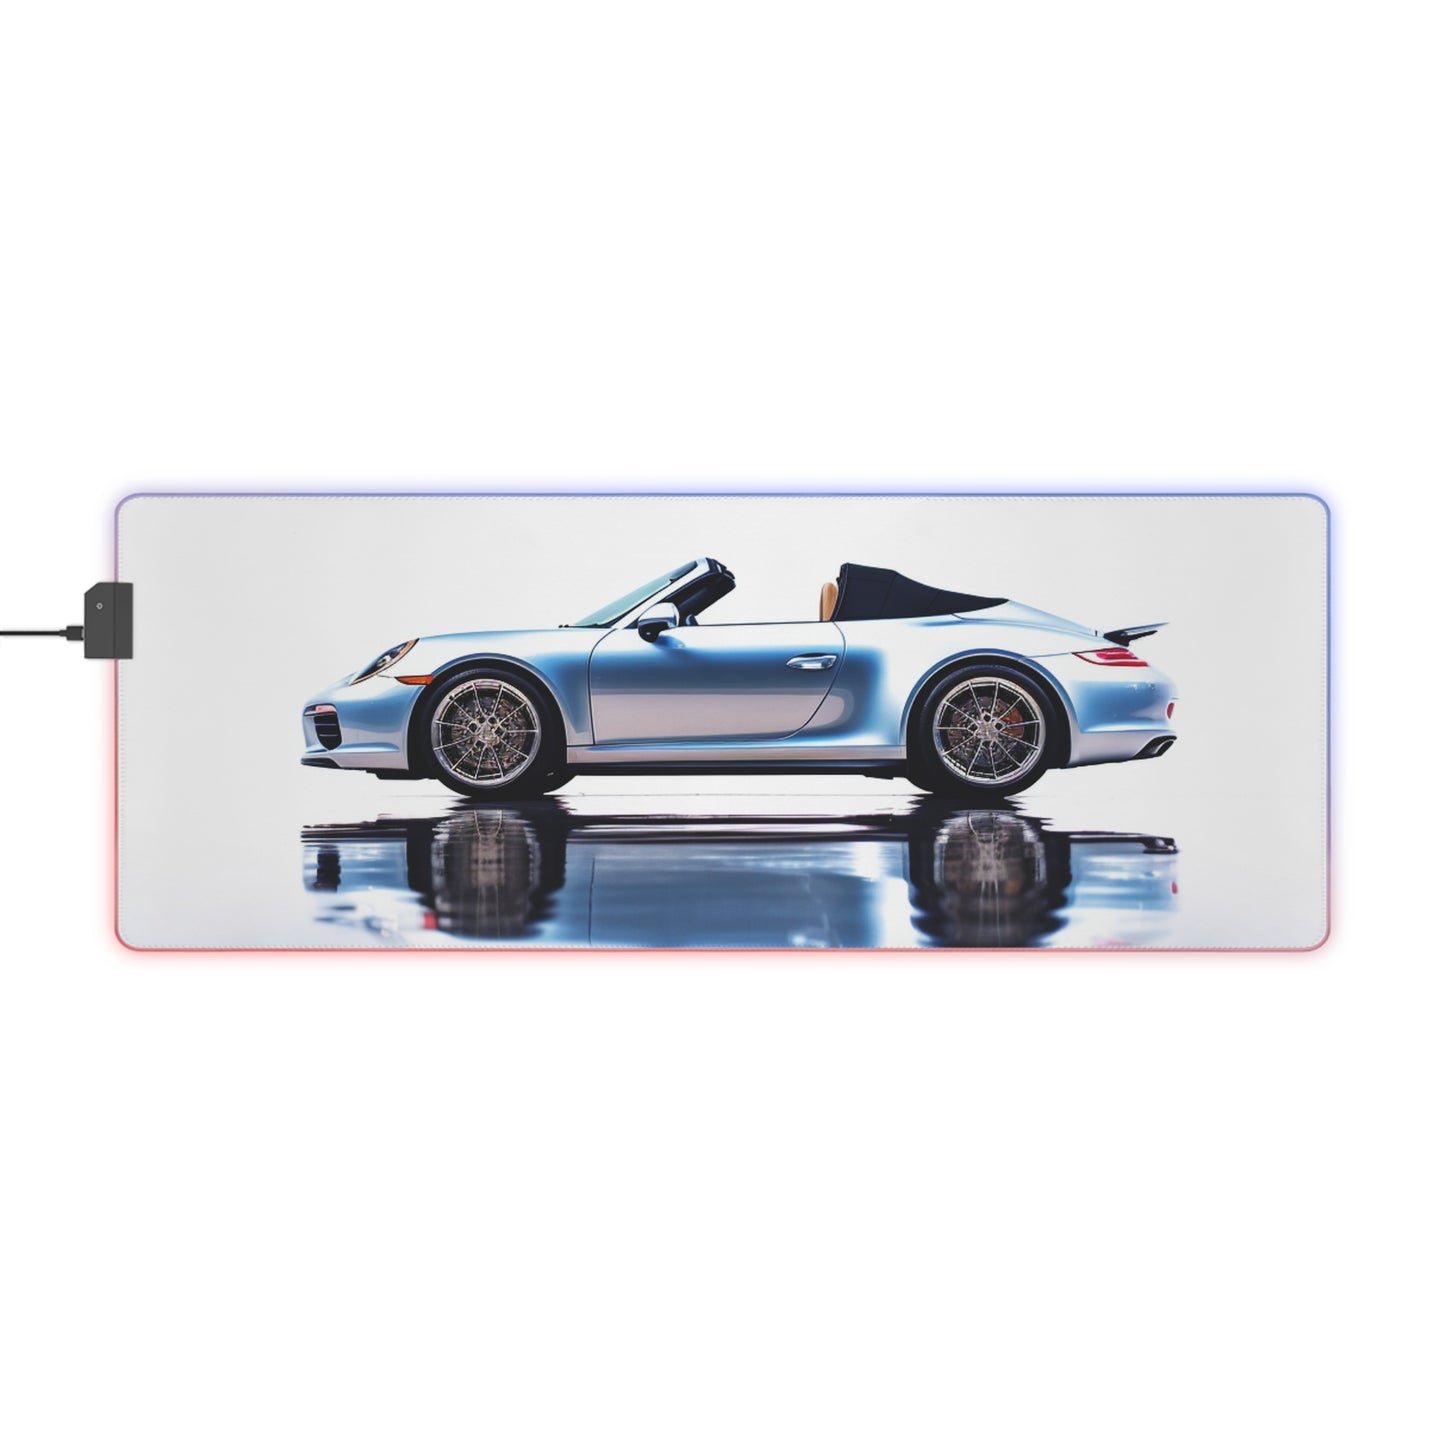 LED Gaming Mouse Pad 911 Speedster on water 1